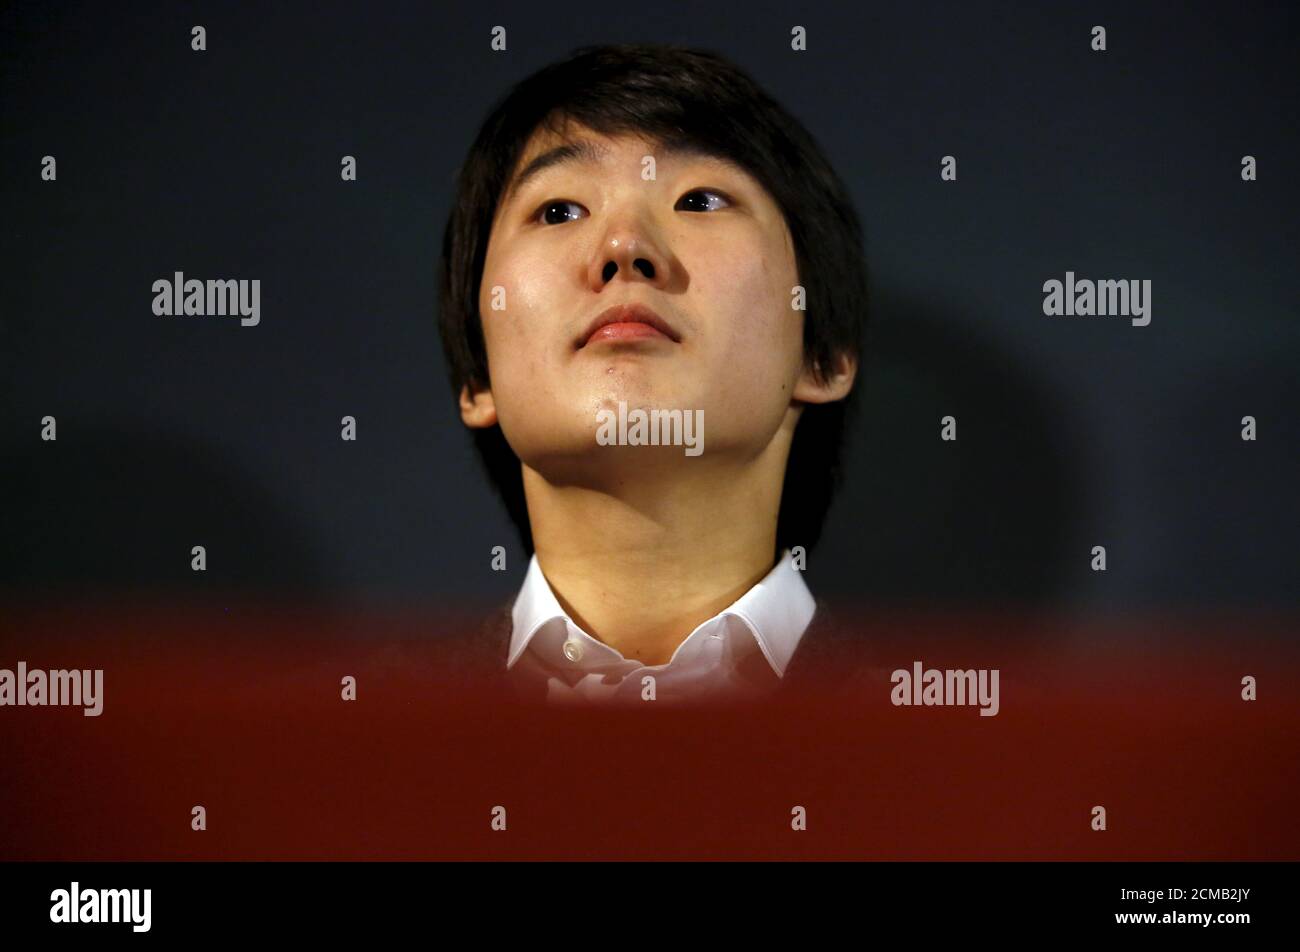 Seong-Jin Cho of South Korea looks on before a news conference after he was  announced the winner of the 17th International Fryderyk Chopin Piano  Competition in Warsaw, Poland October 21, 2015. REUTERS/Kacper